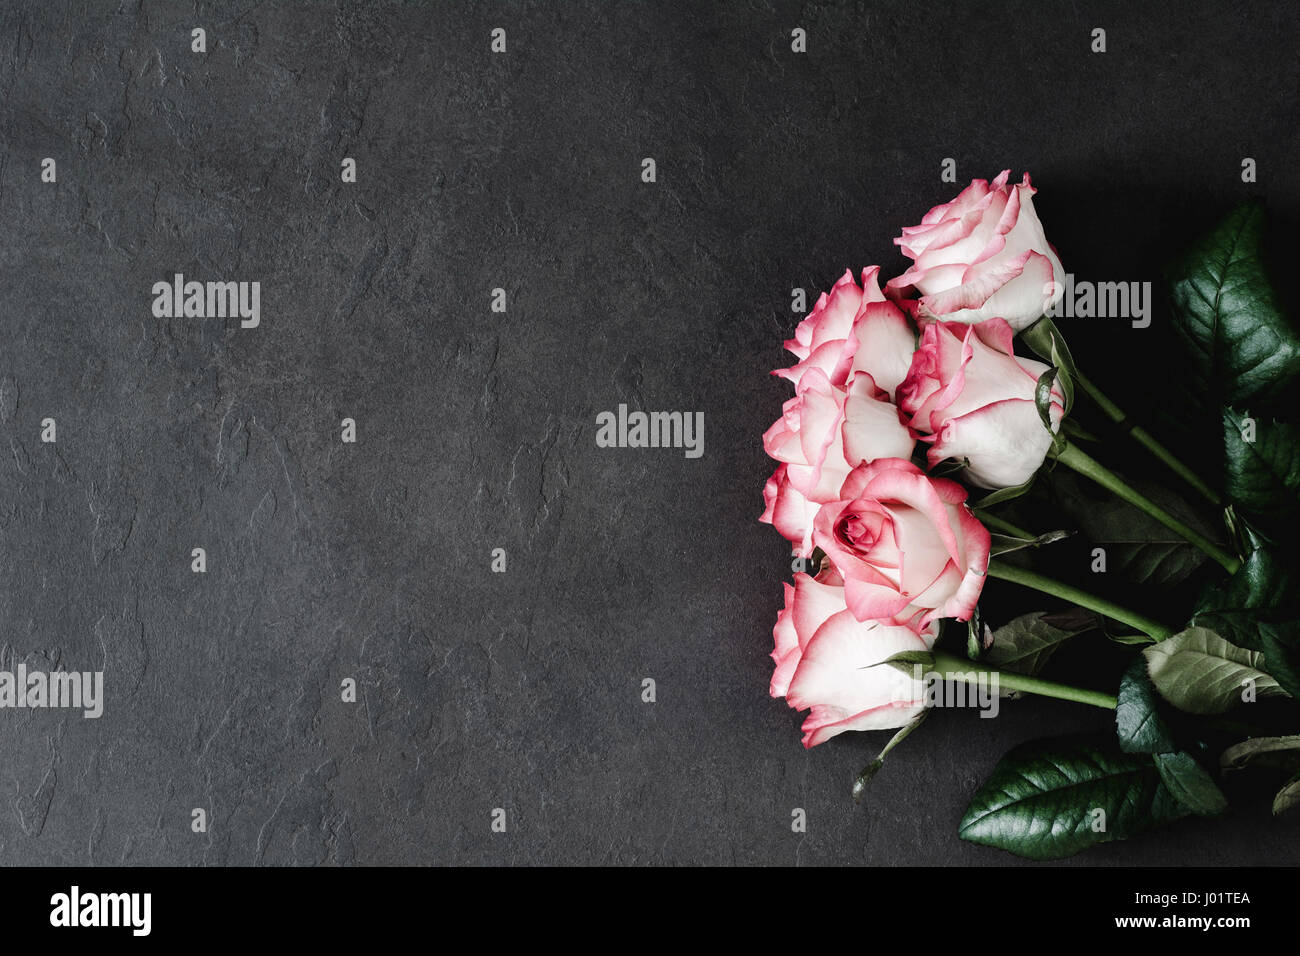 Floral frame: bouquet of pink and white roses on dark stone background with copy space for text. Styled womans day, mothers day floral background Stock Photo